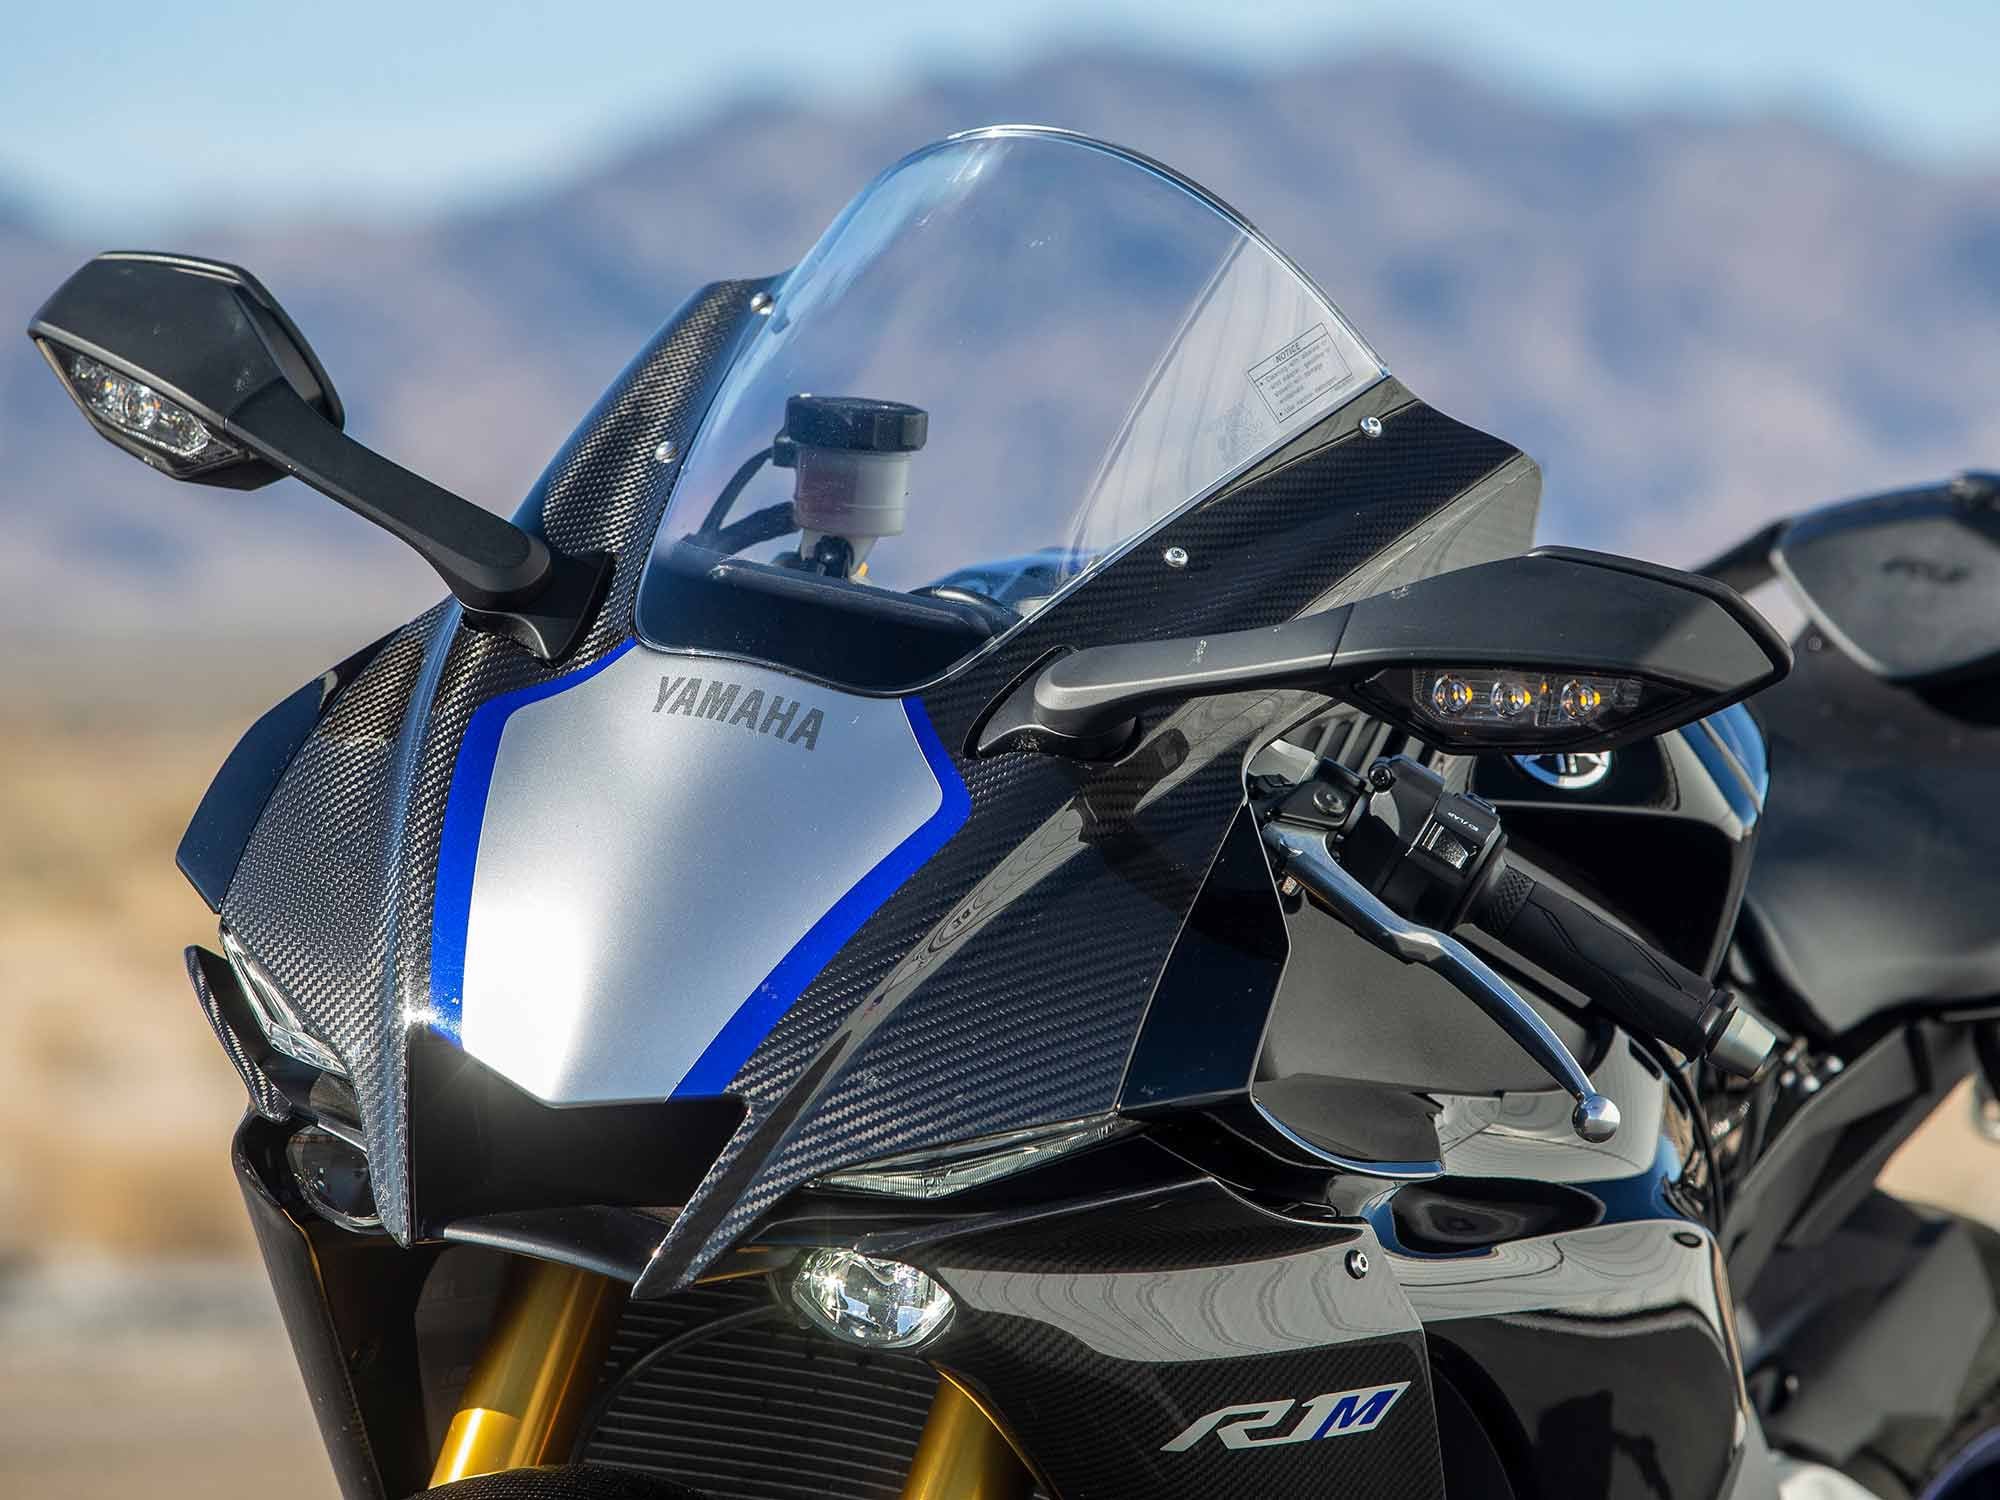 Draped in full carbon fiber bodywork (including the tail section), Yamaha’s YZF-R1M looks like a bespoke piece of hardware for cruising around the street—or setting fast lap times at the circuit.